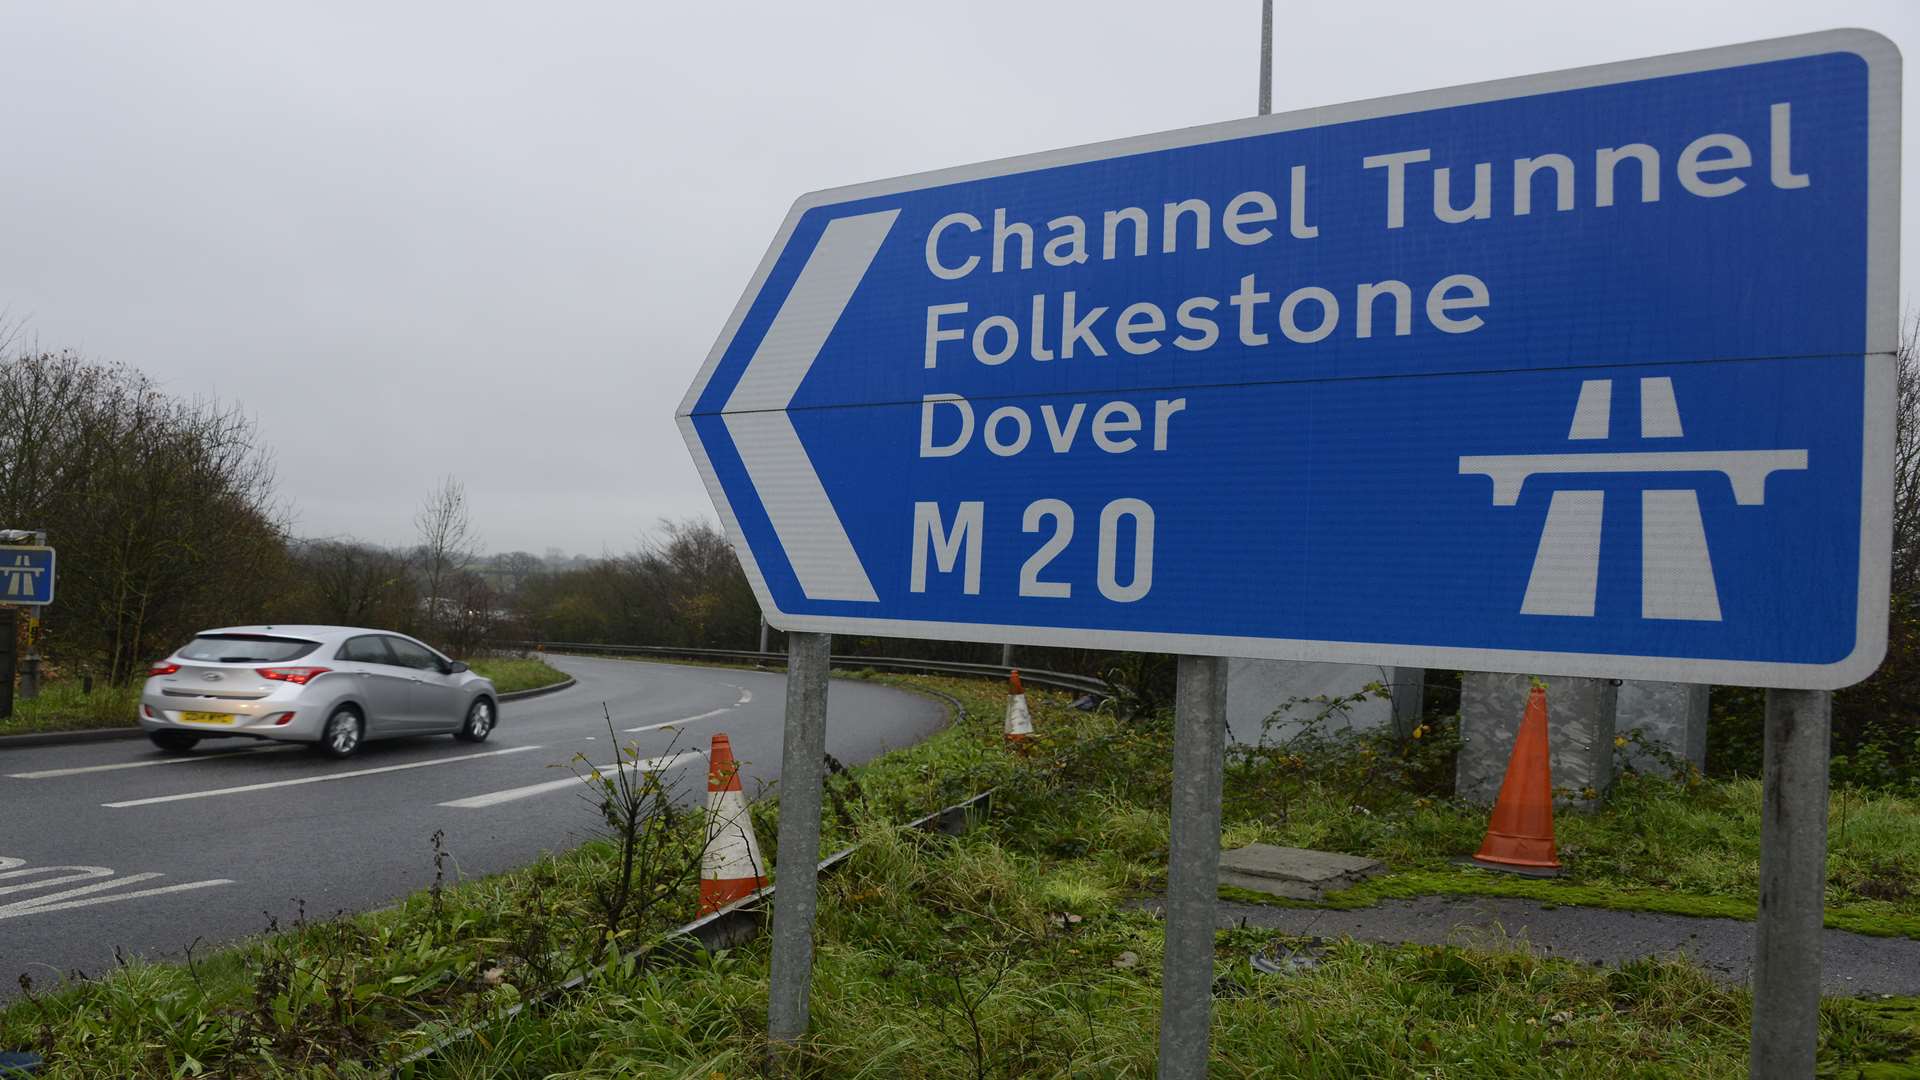 A new junction would be built near junction 10 of the M20